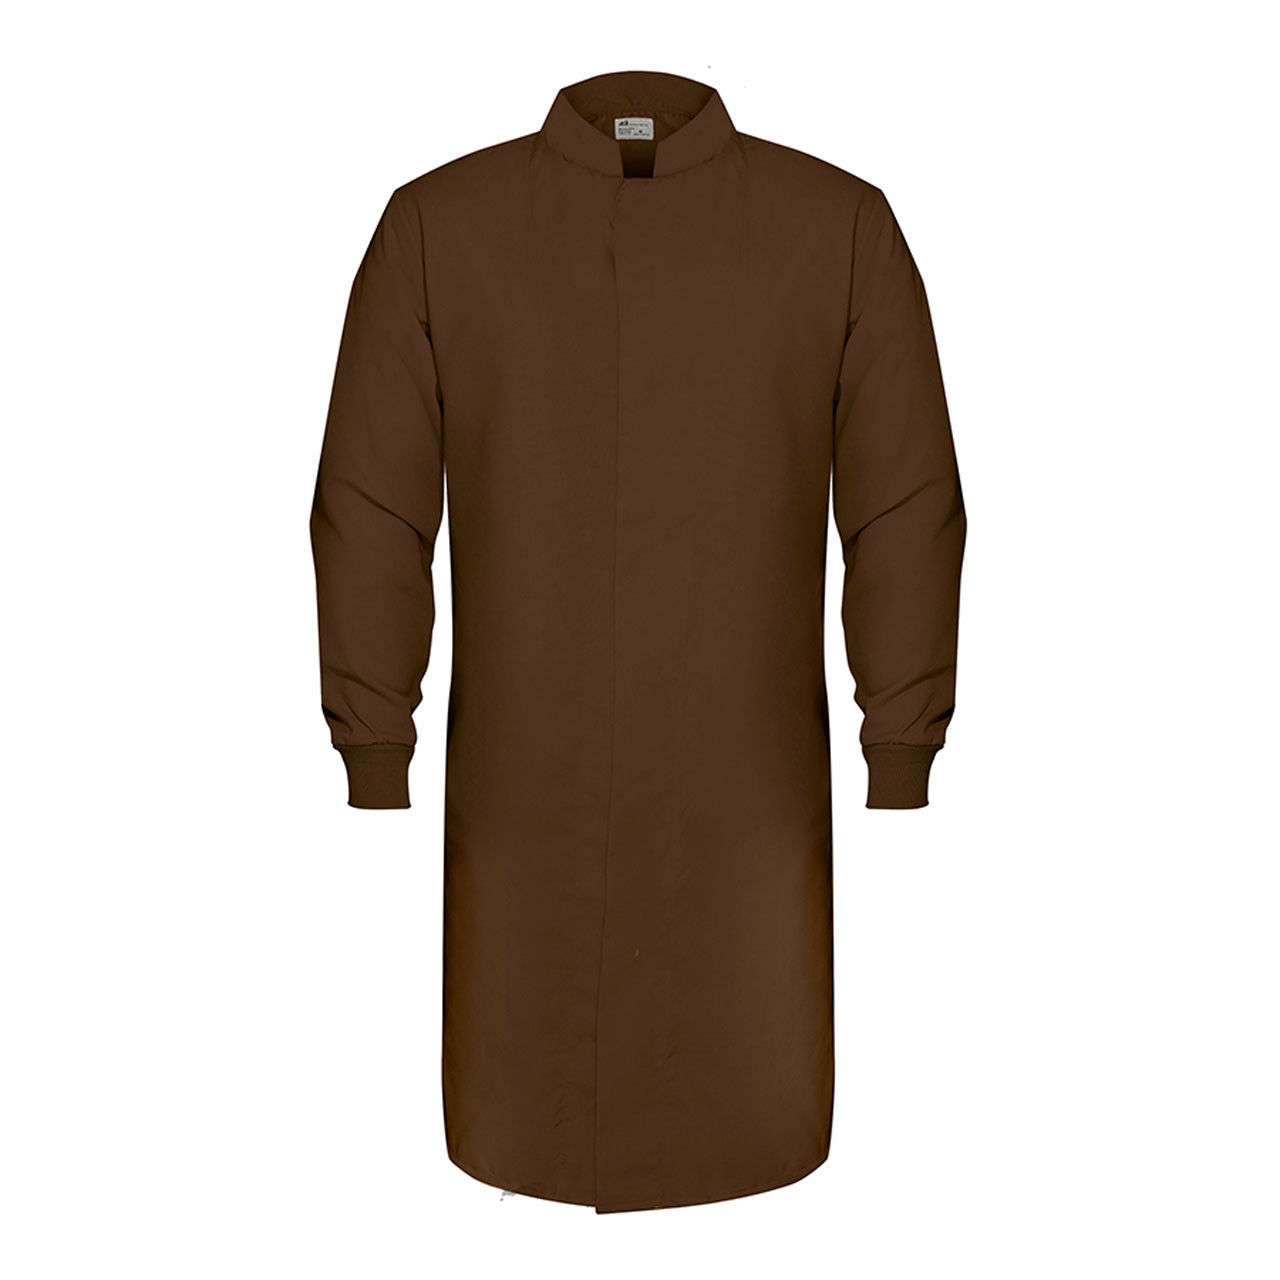 Does the brown lab coat have any specific type of cuffs?